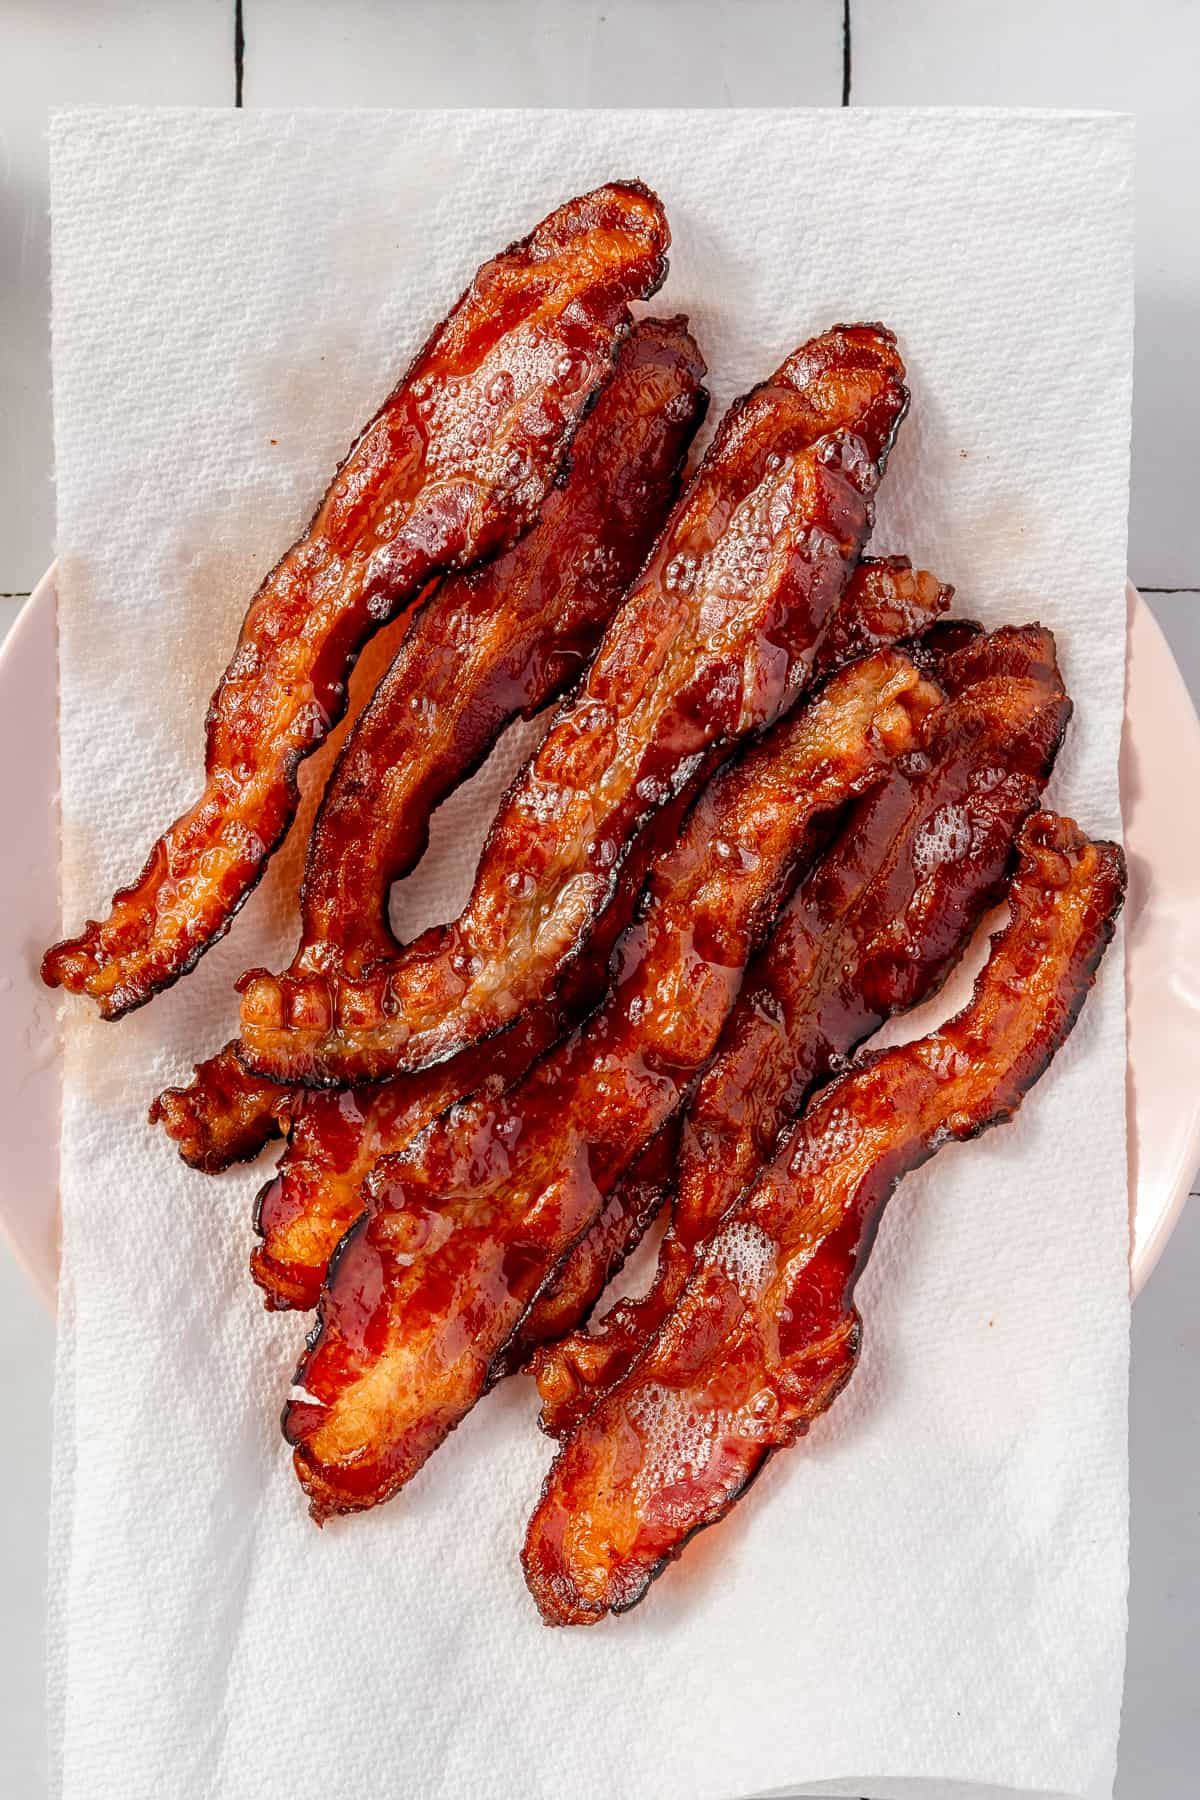 Crisped bacon on a paper towel.